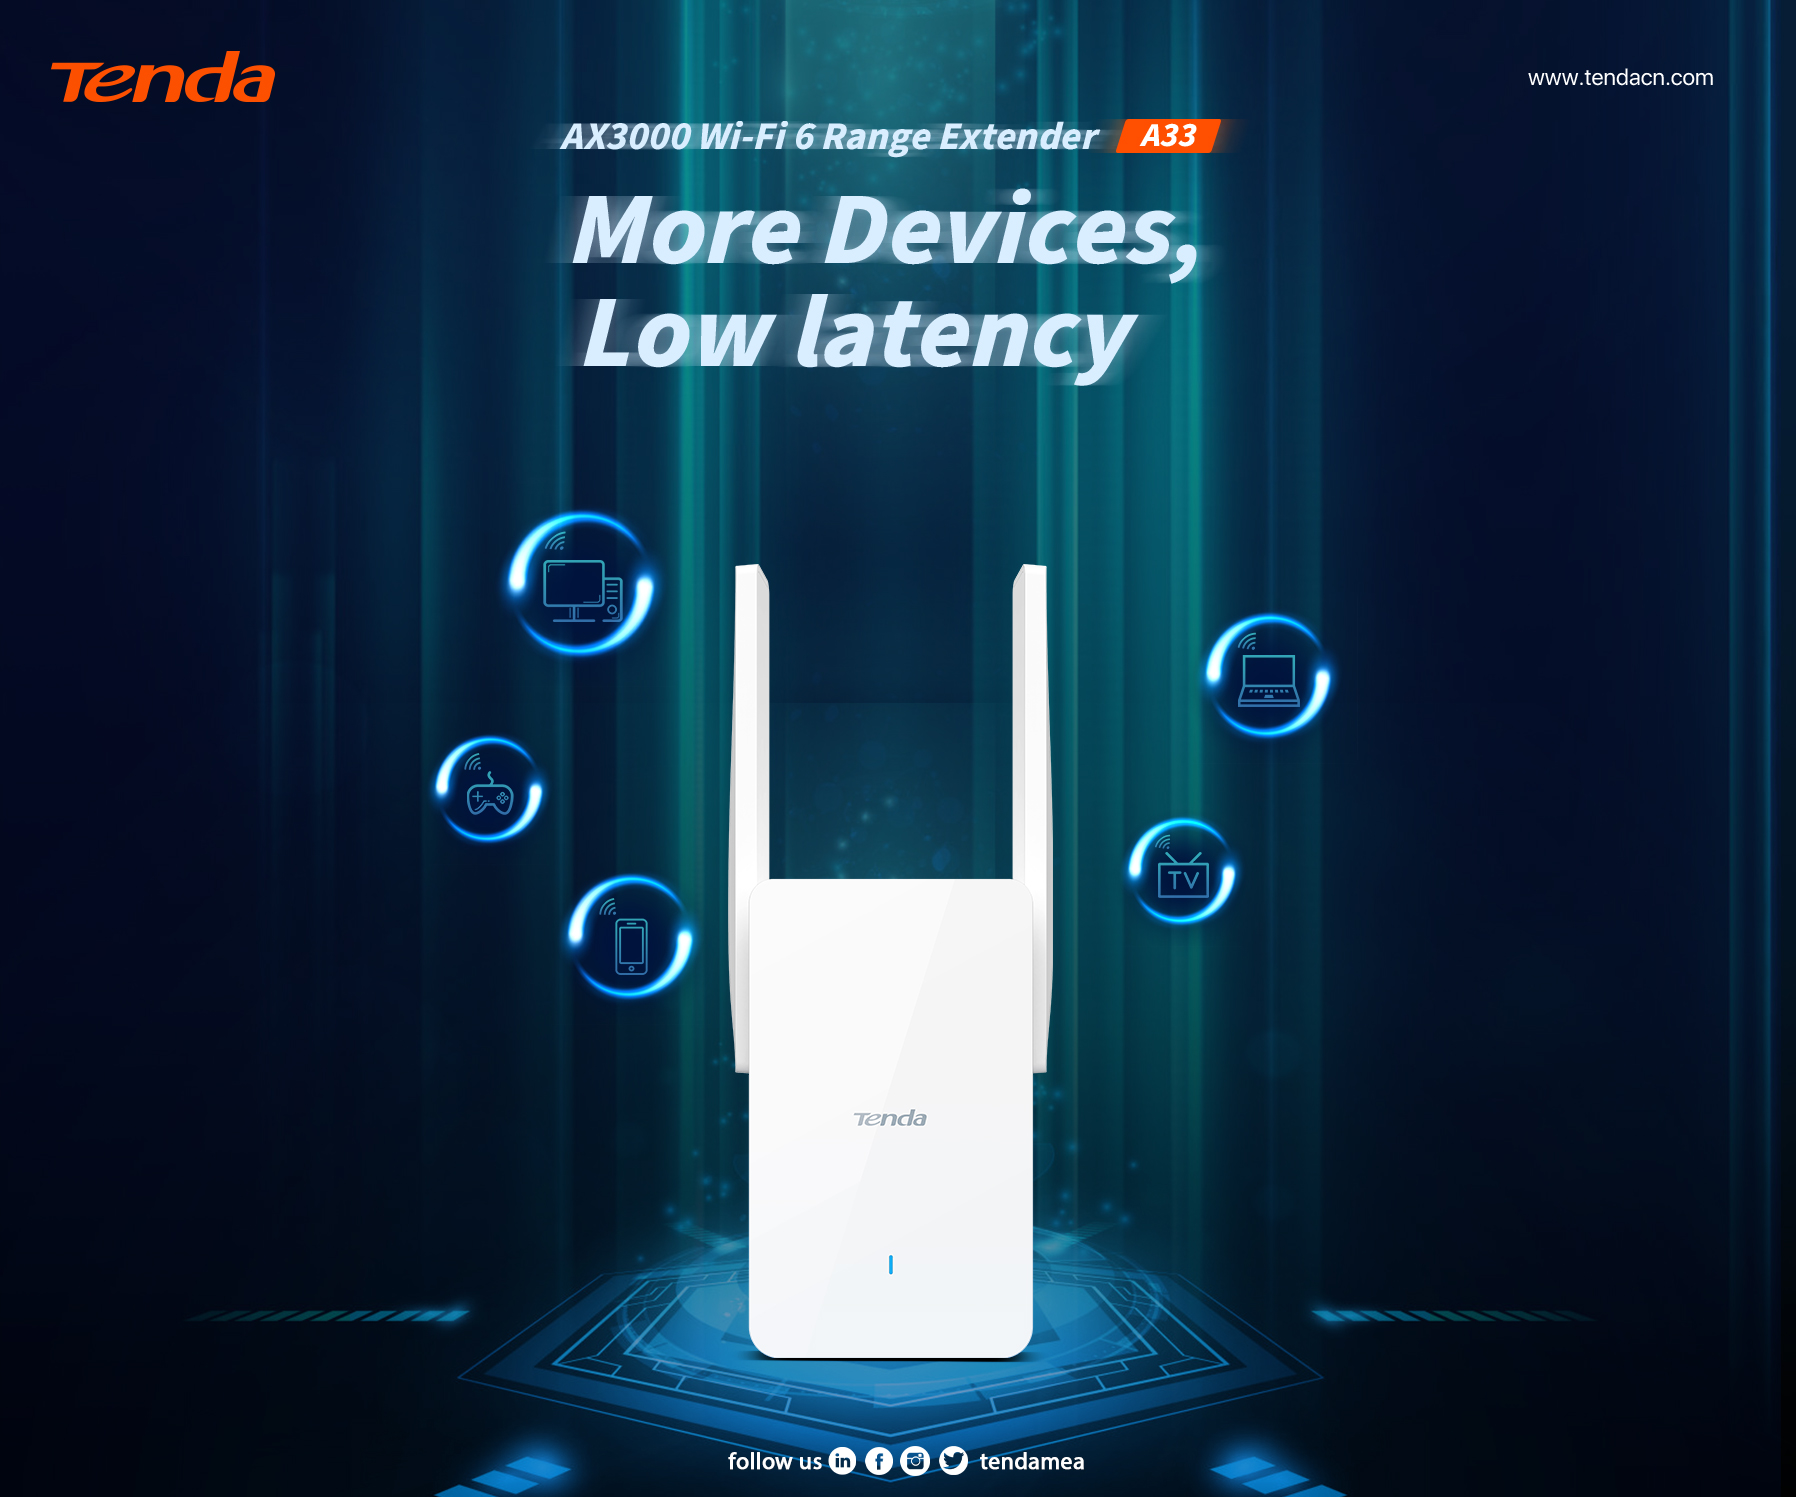 Introducing Next-Gen AX3000 Wi-Fi 6 with New Chipset and Incredibly Low  Latency -Cudy: WiFi, 4G, and 5G Equipments and Solutions